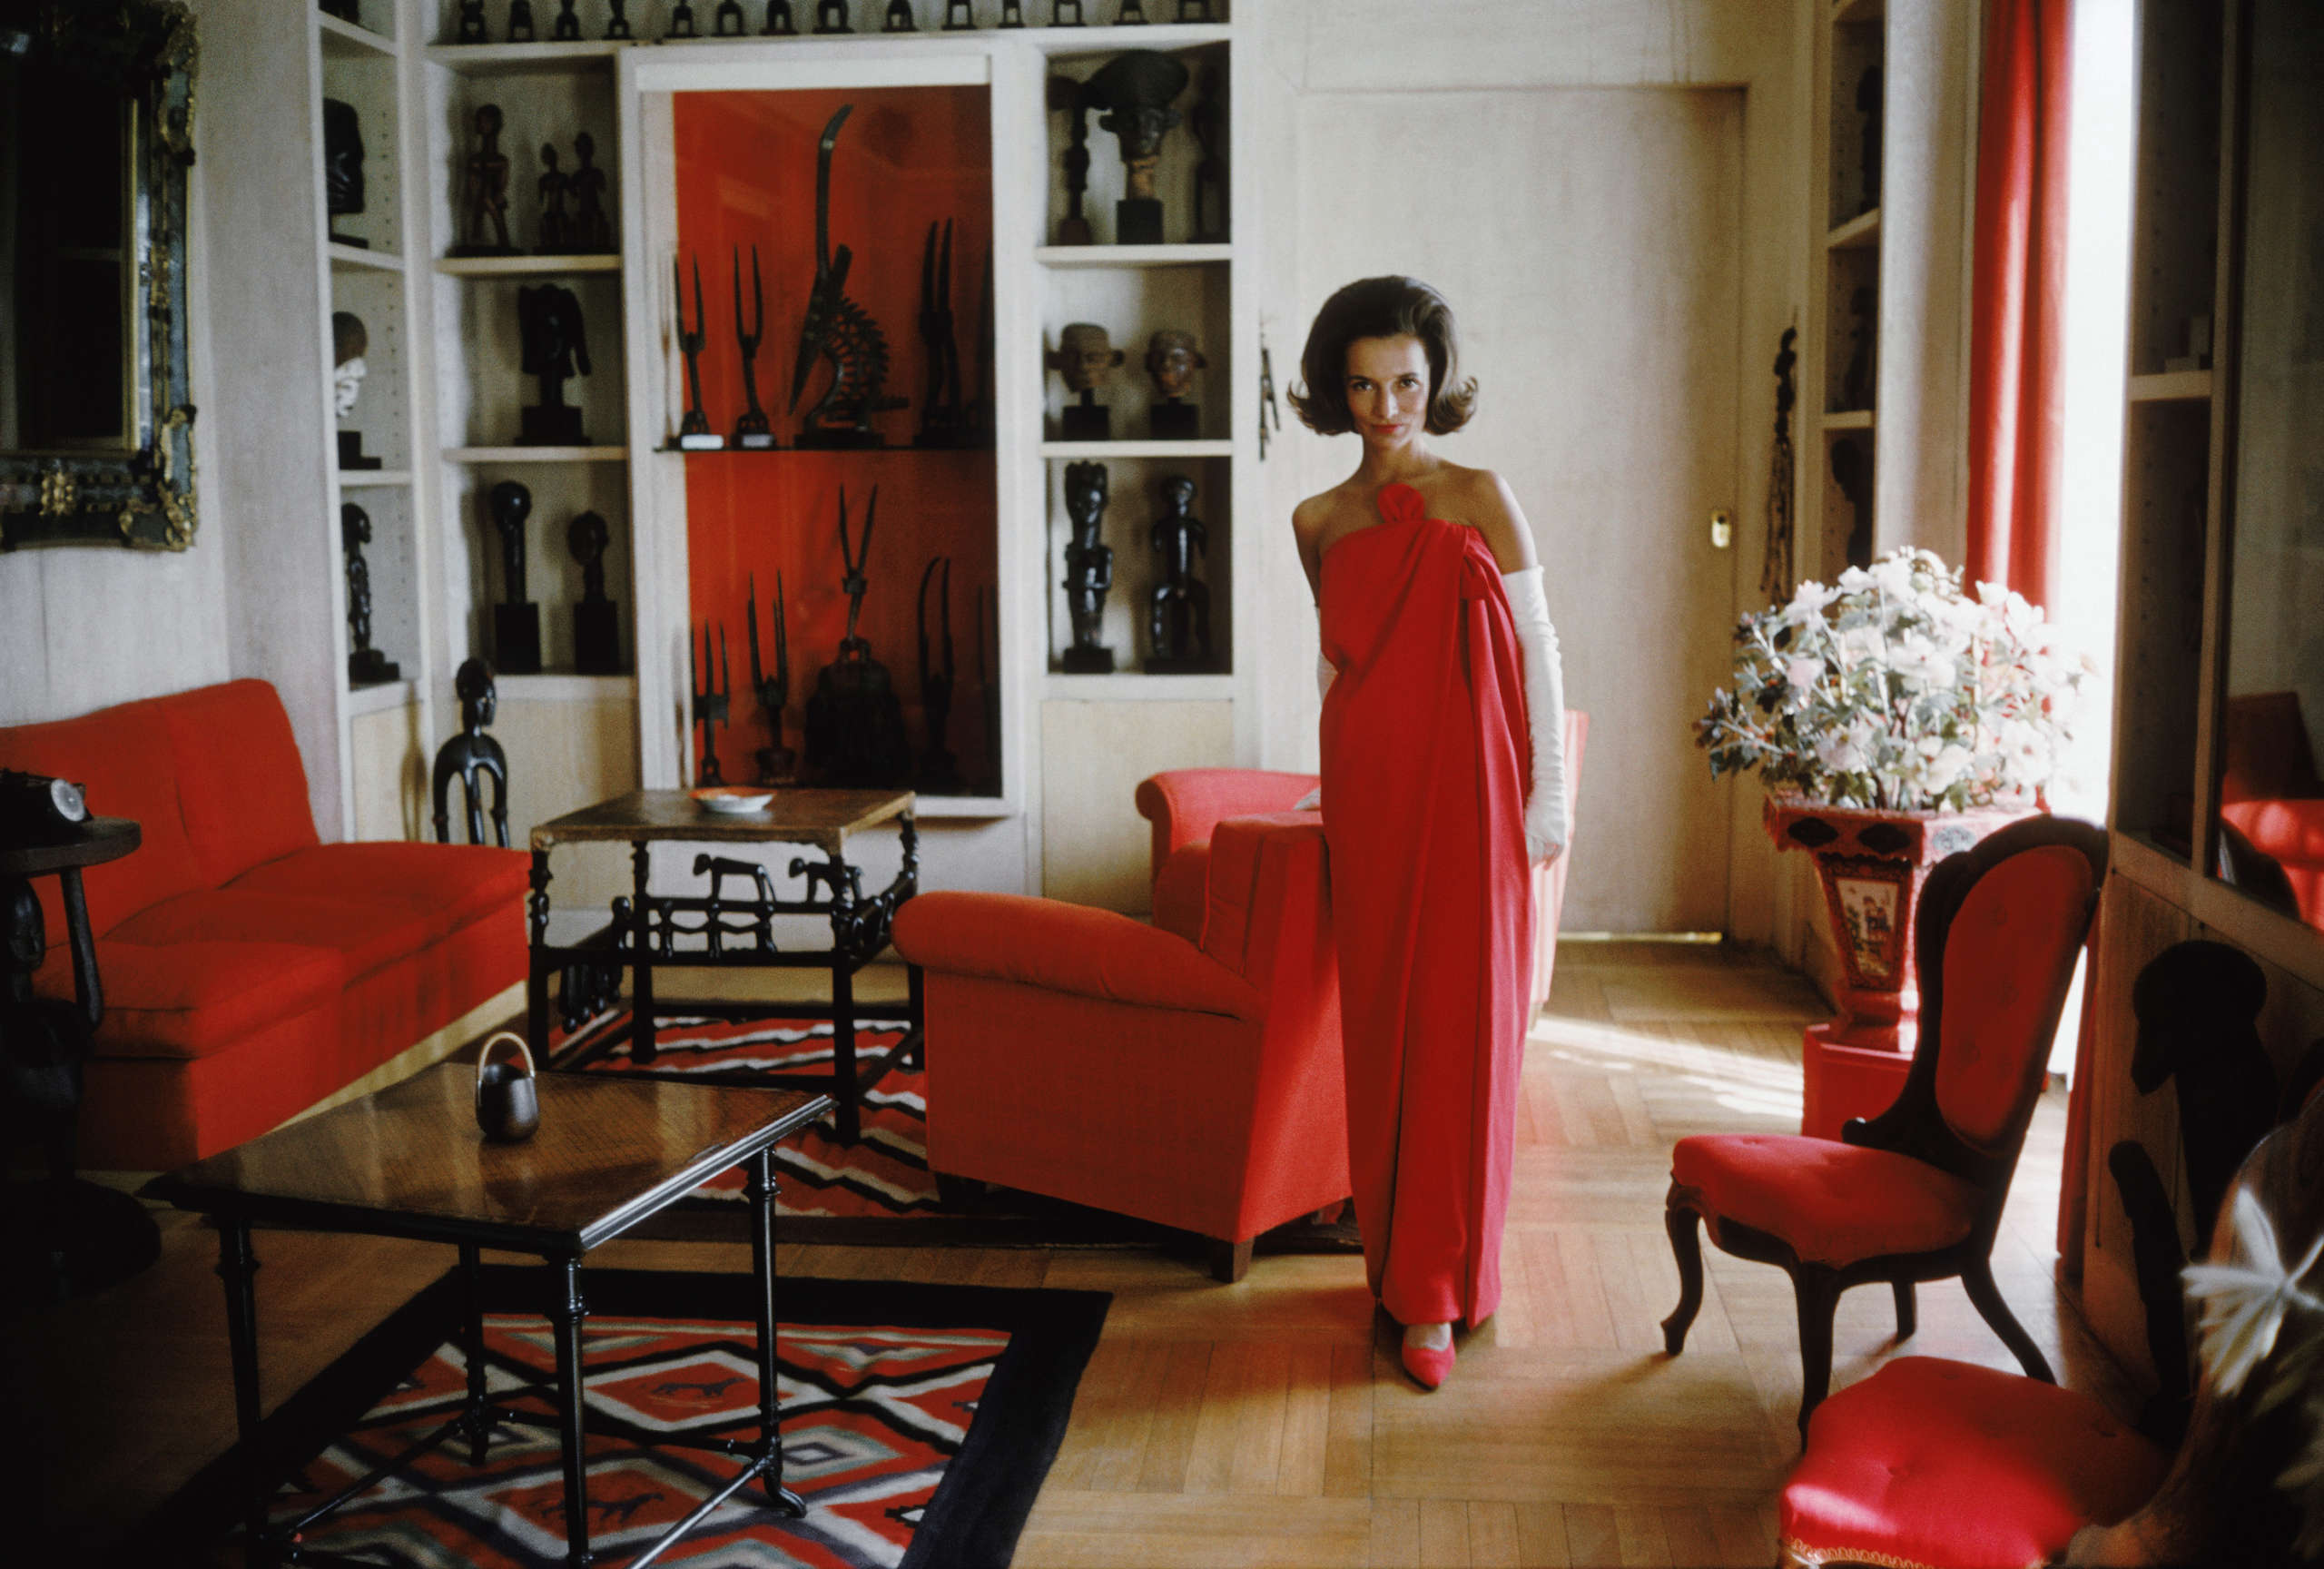 Mark Shaw, Lee Radziwill in a red gown by Lanvin, 1960s - Artwork 40968 |  Jackson Fine Art